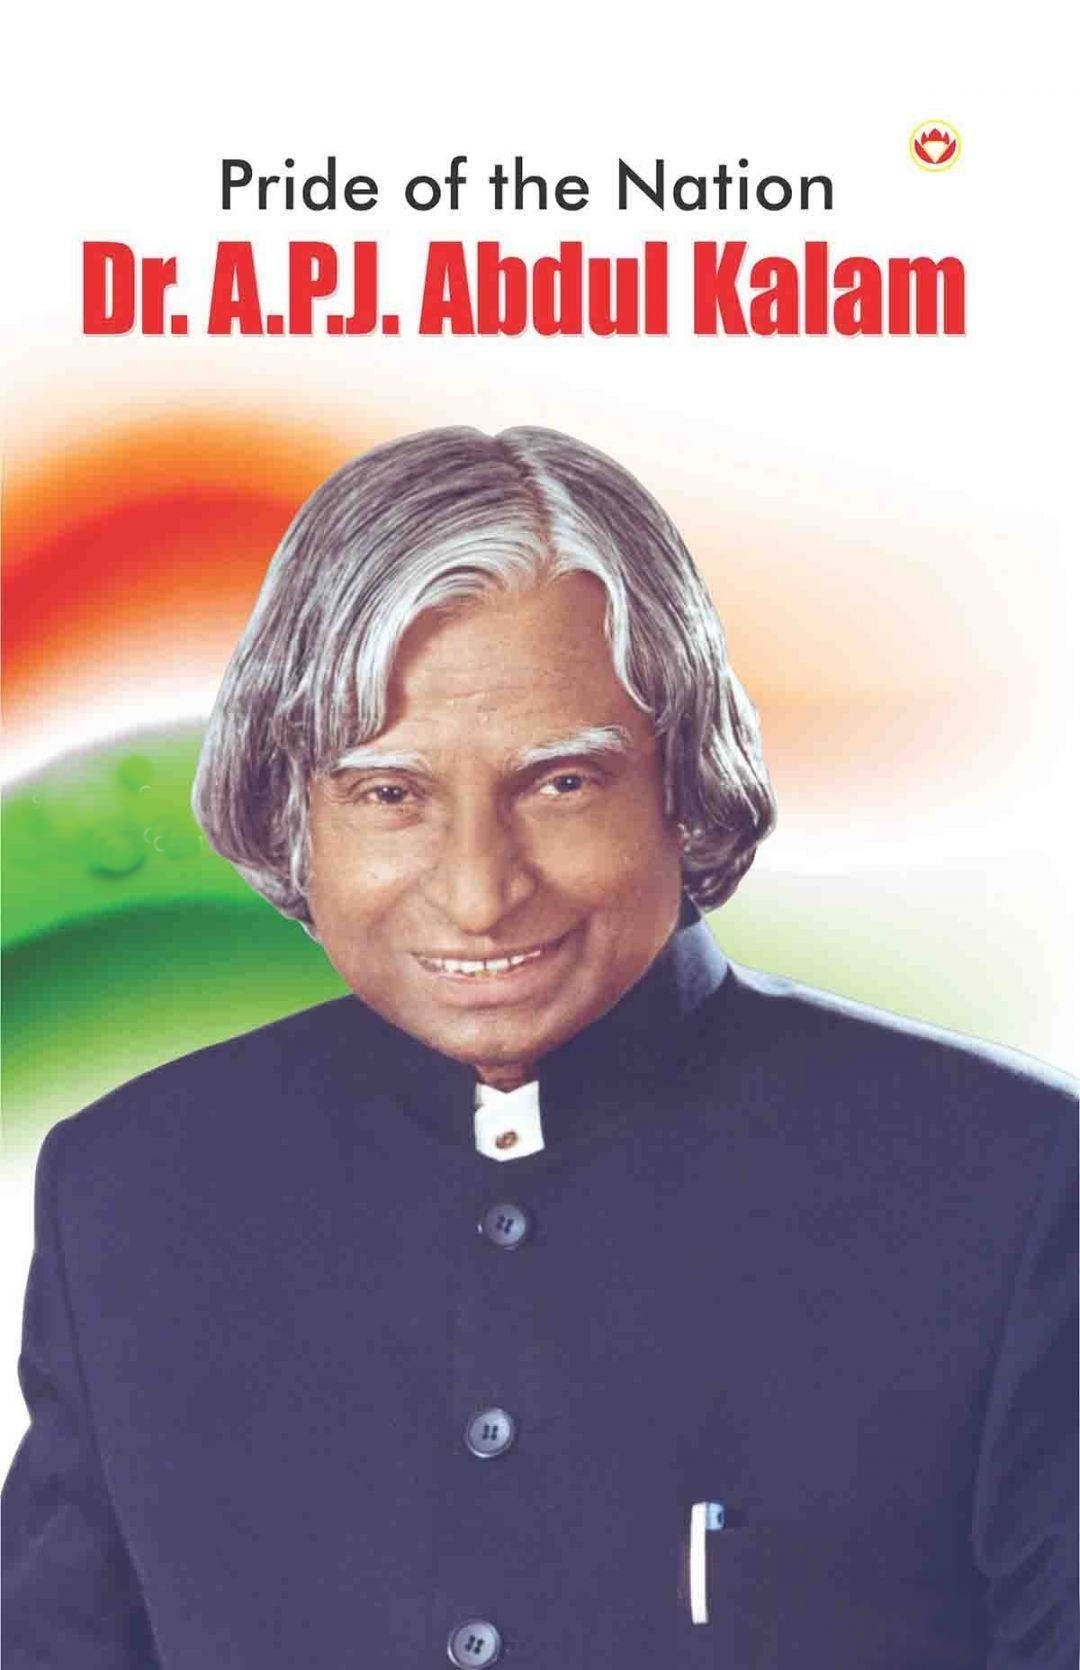 Abdul Kalam Hd Pride Of The Nation Background